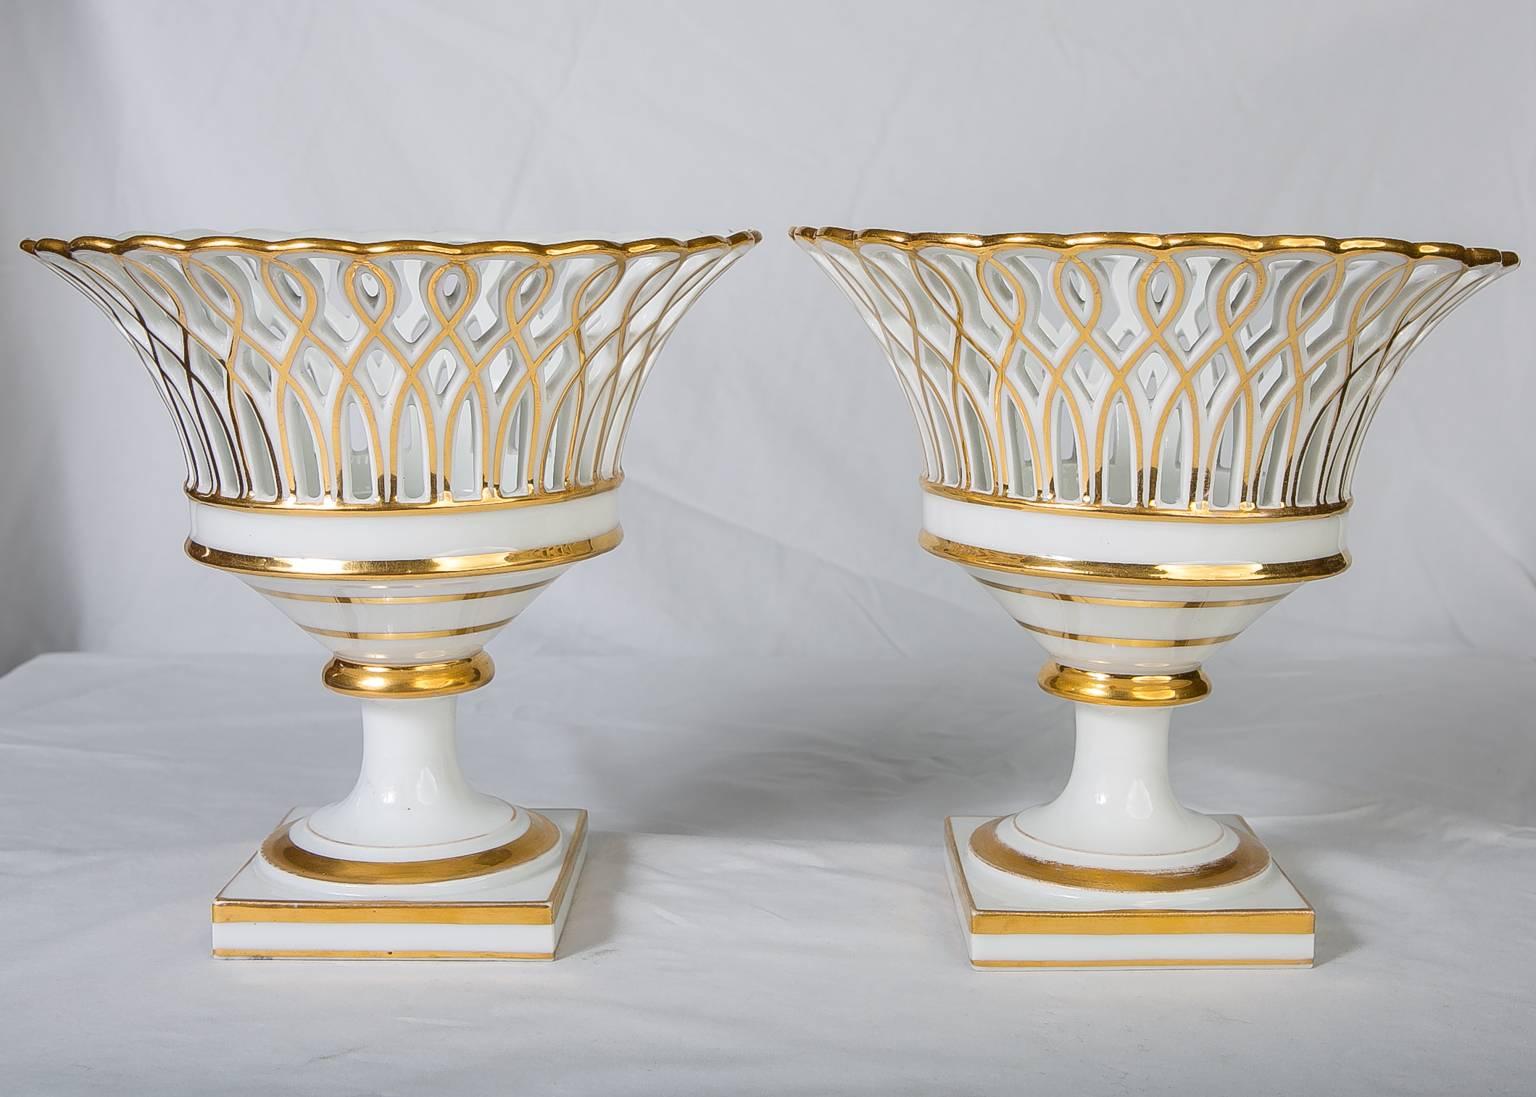 Pair of Antique French Porcelain Gilded Baskets 'Corbeilles' 4